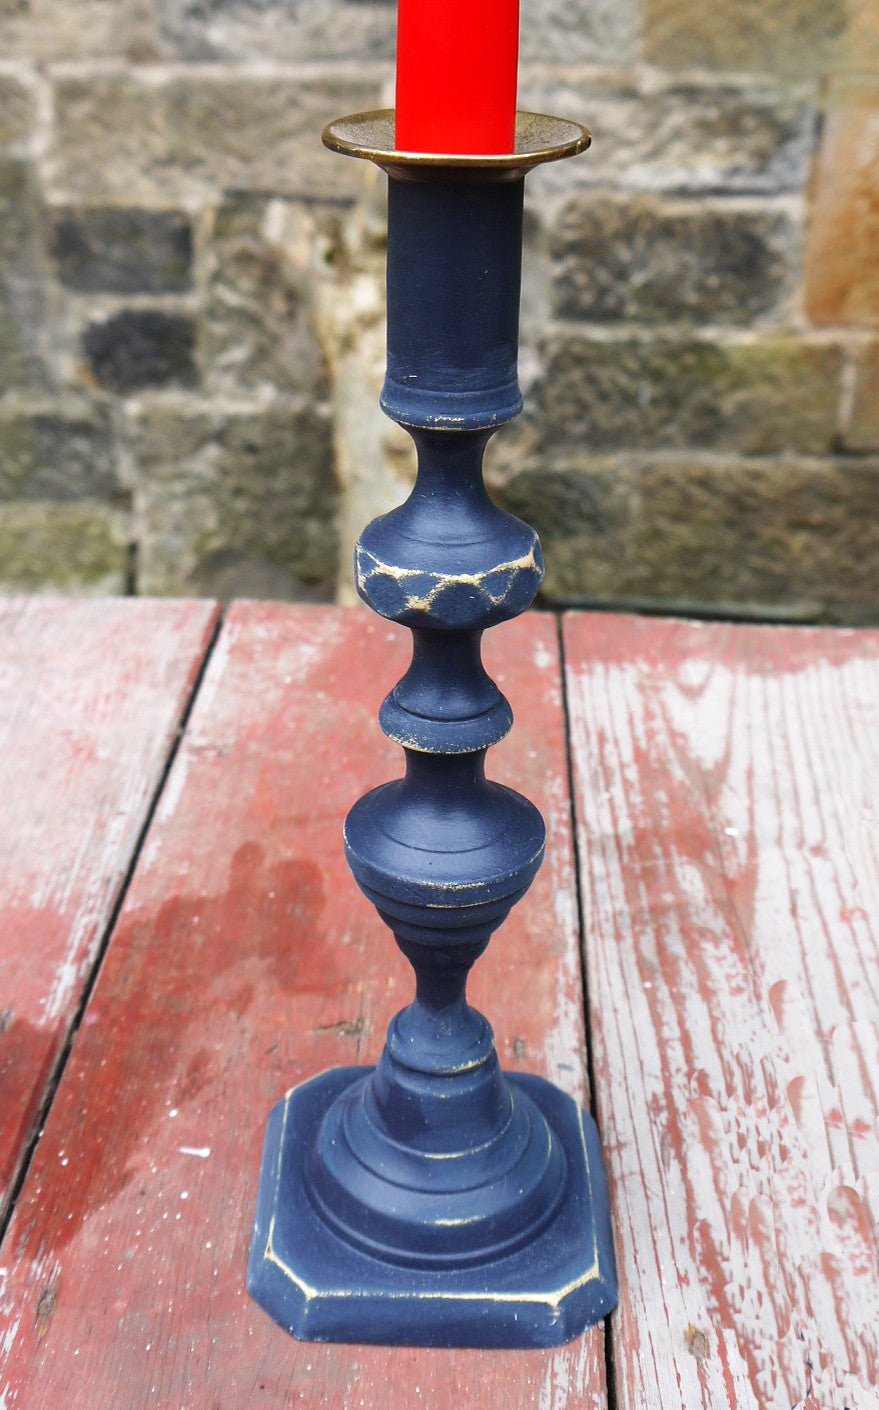 Set of two candlesticks in midnight blue and gold.